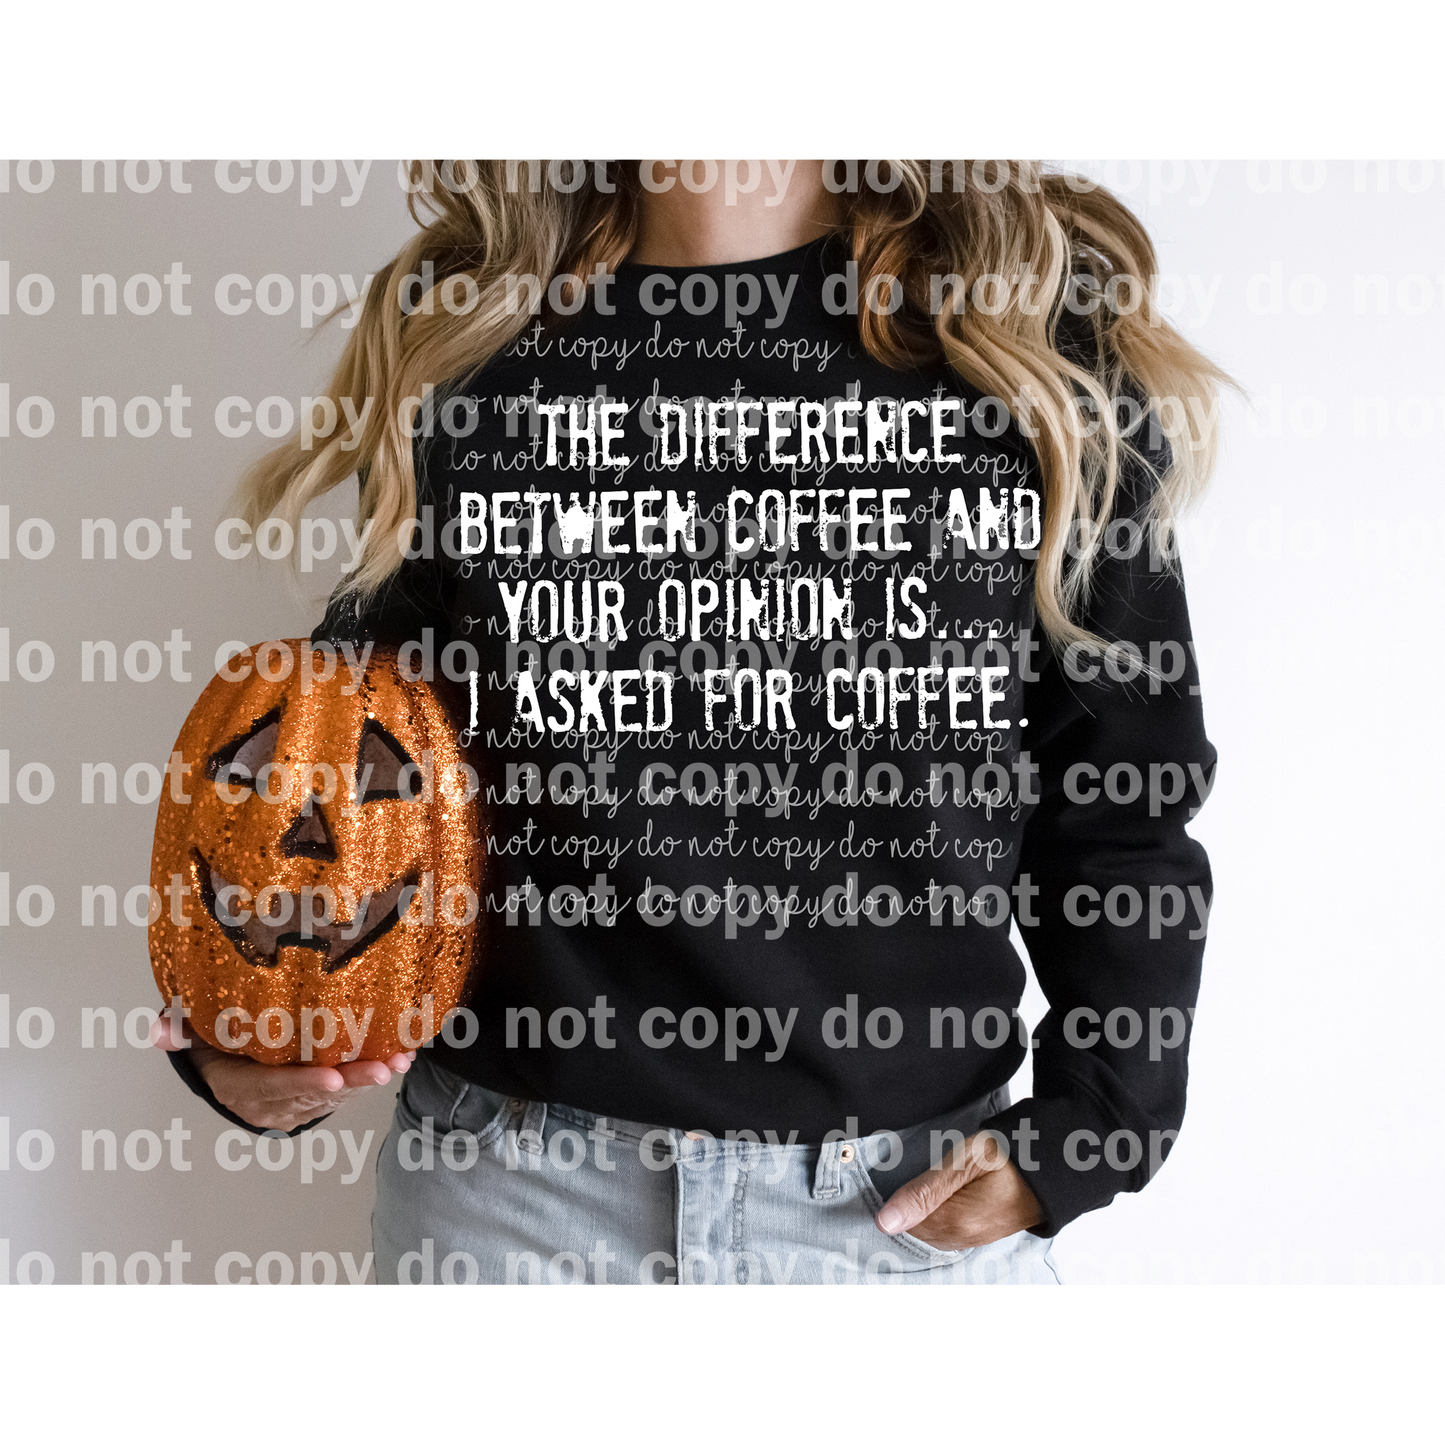 The Difference Between Coffee And Your Opinion Is I Asked For Coffee Black/White Color Dream Print or Sublimation Print